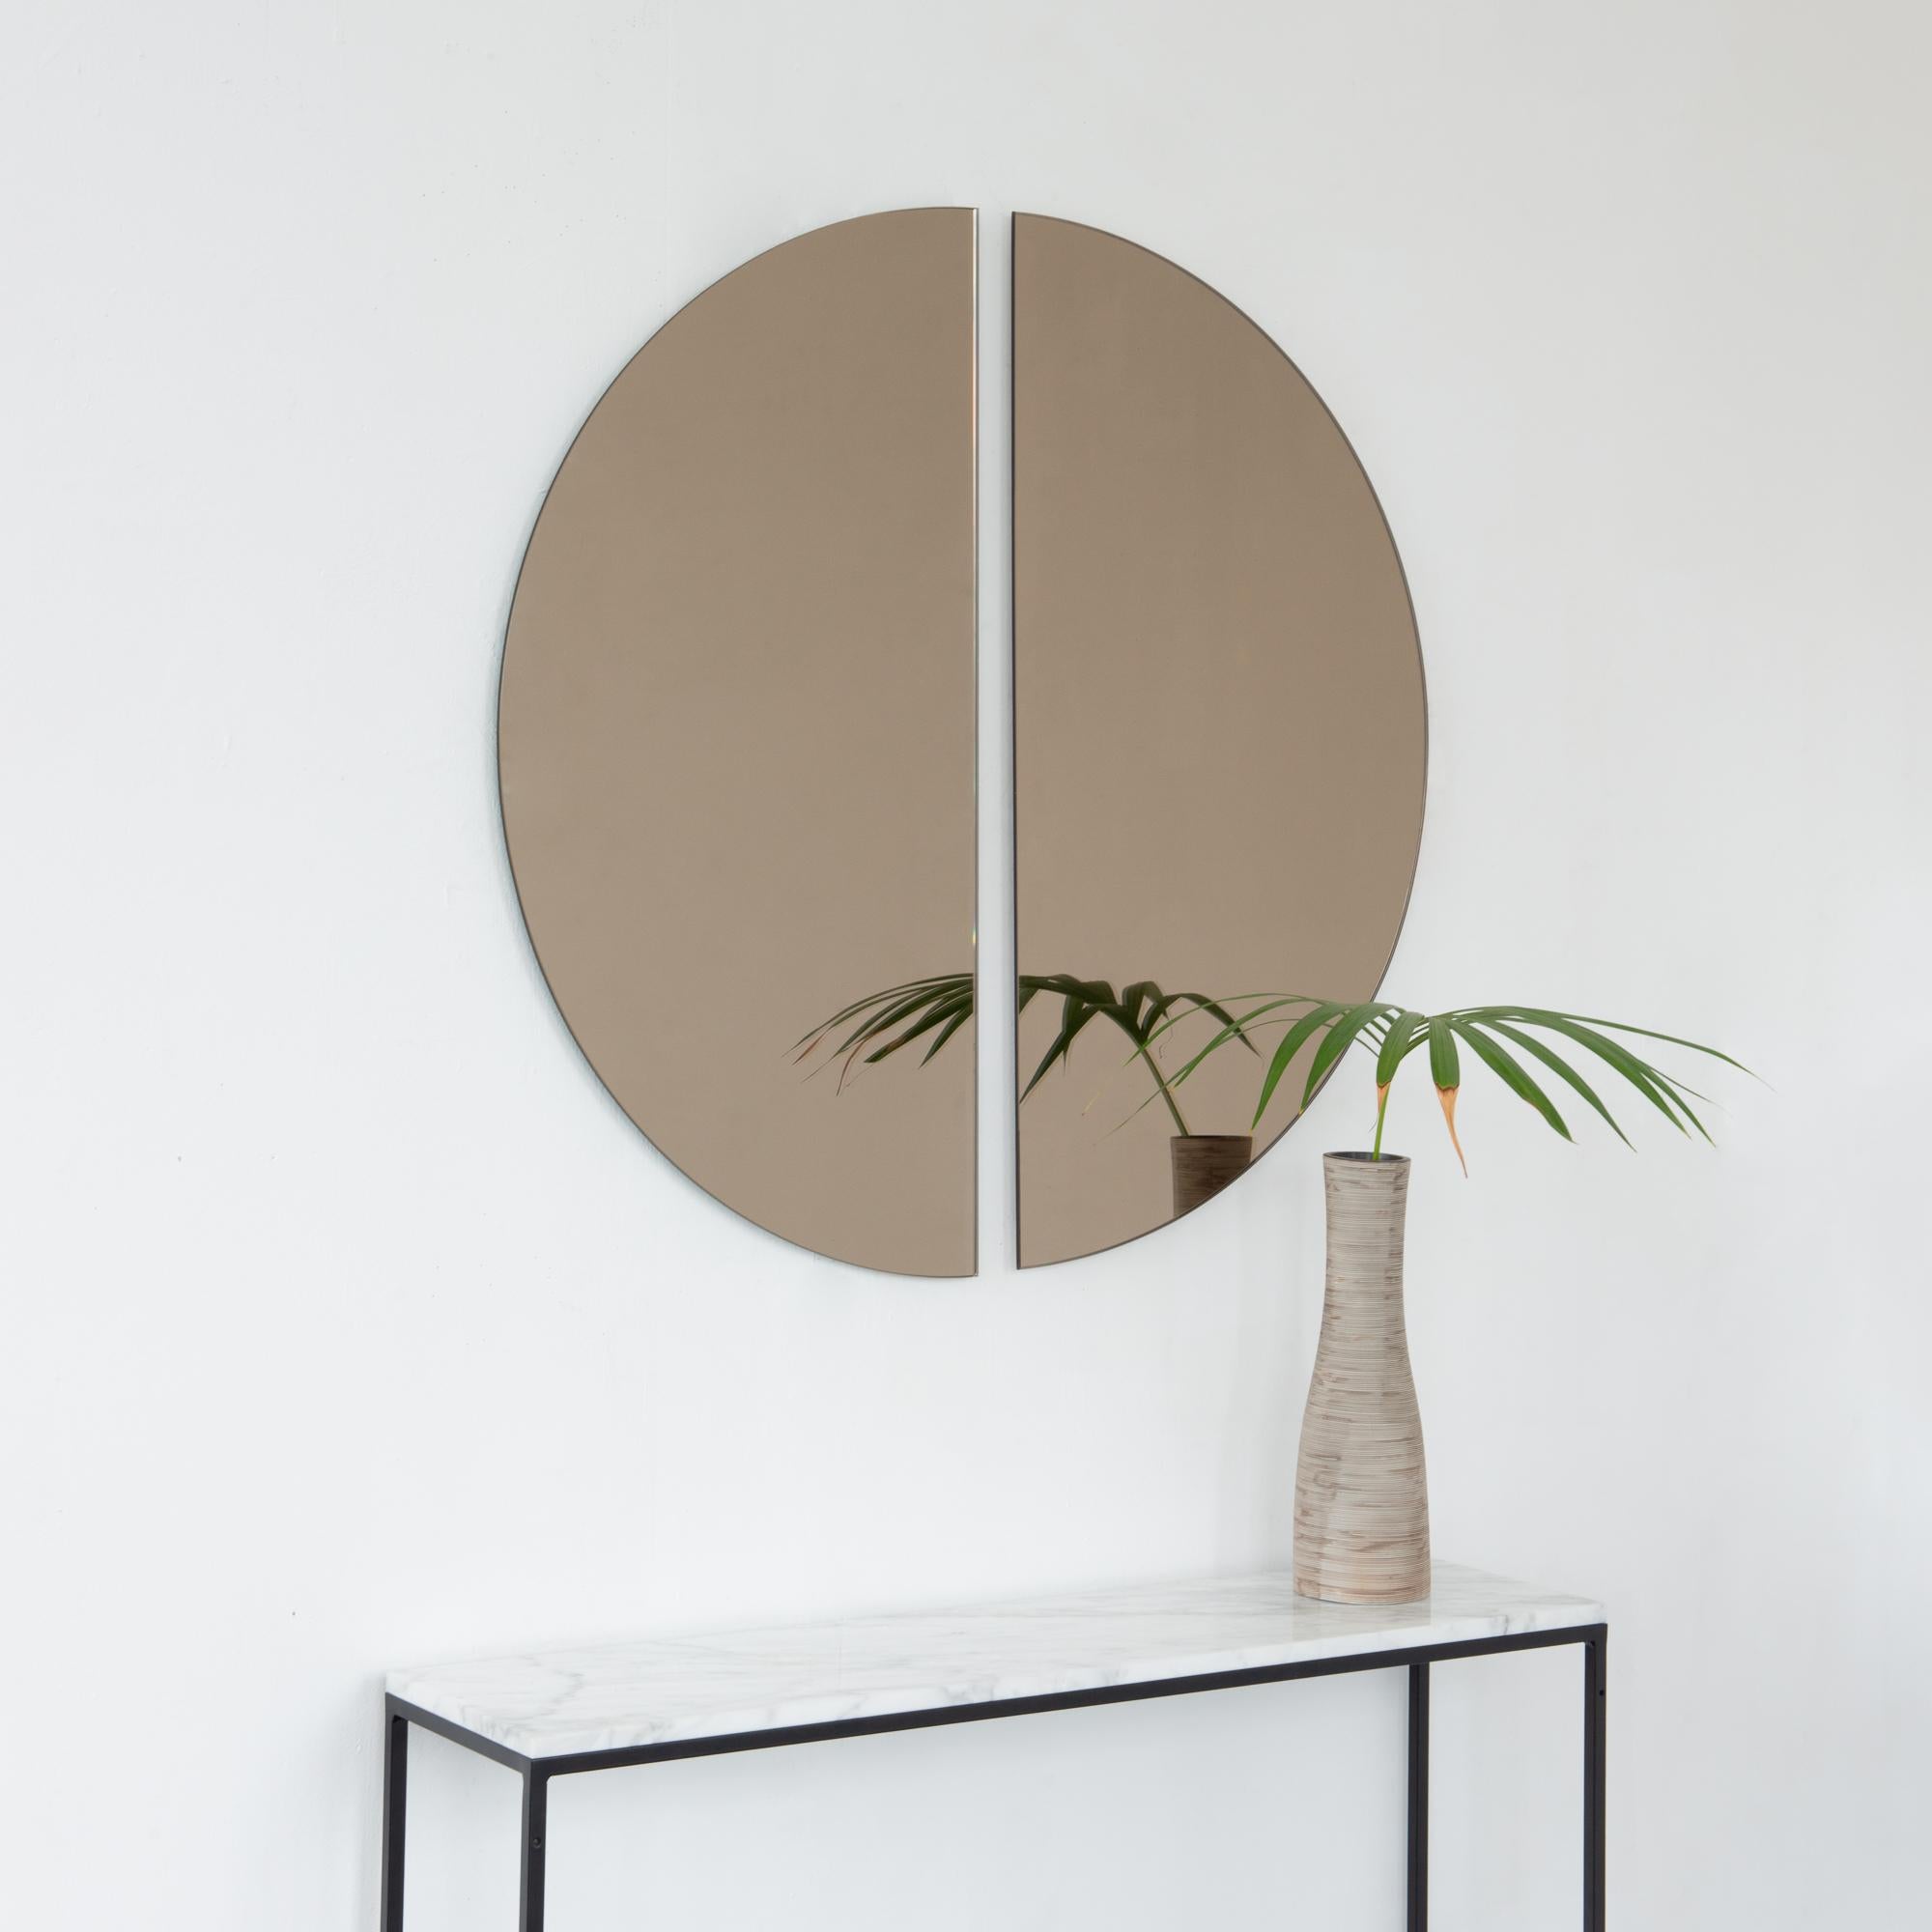 NEW DESIGN

Set of two charming and minimalist half-moon bronze tinted frameless mirrors with a floating effect. Fitted with a quality and ingenious hanging system for a flexible installation in 4 different directions. Designed and made in London,